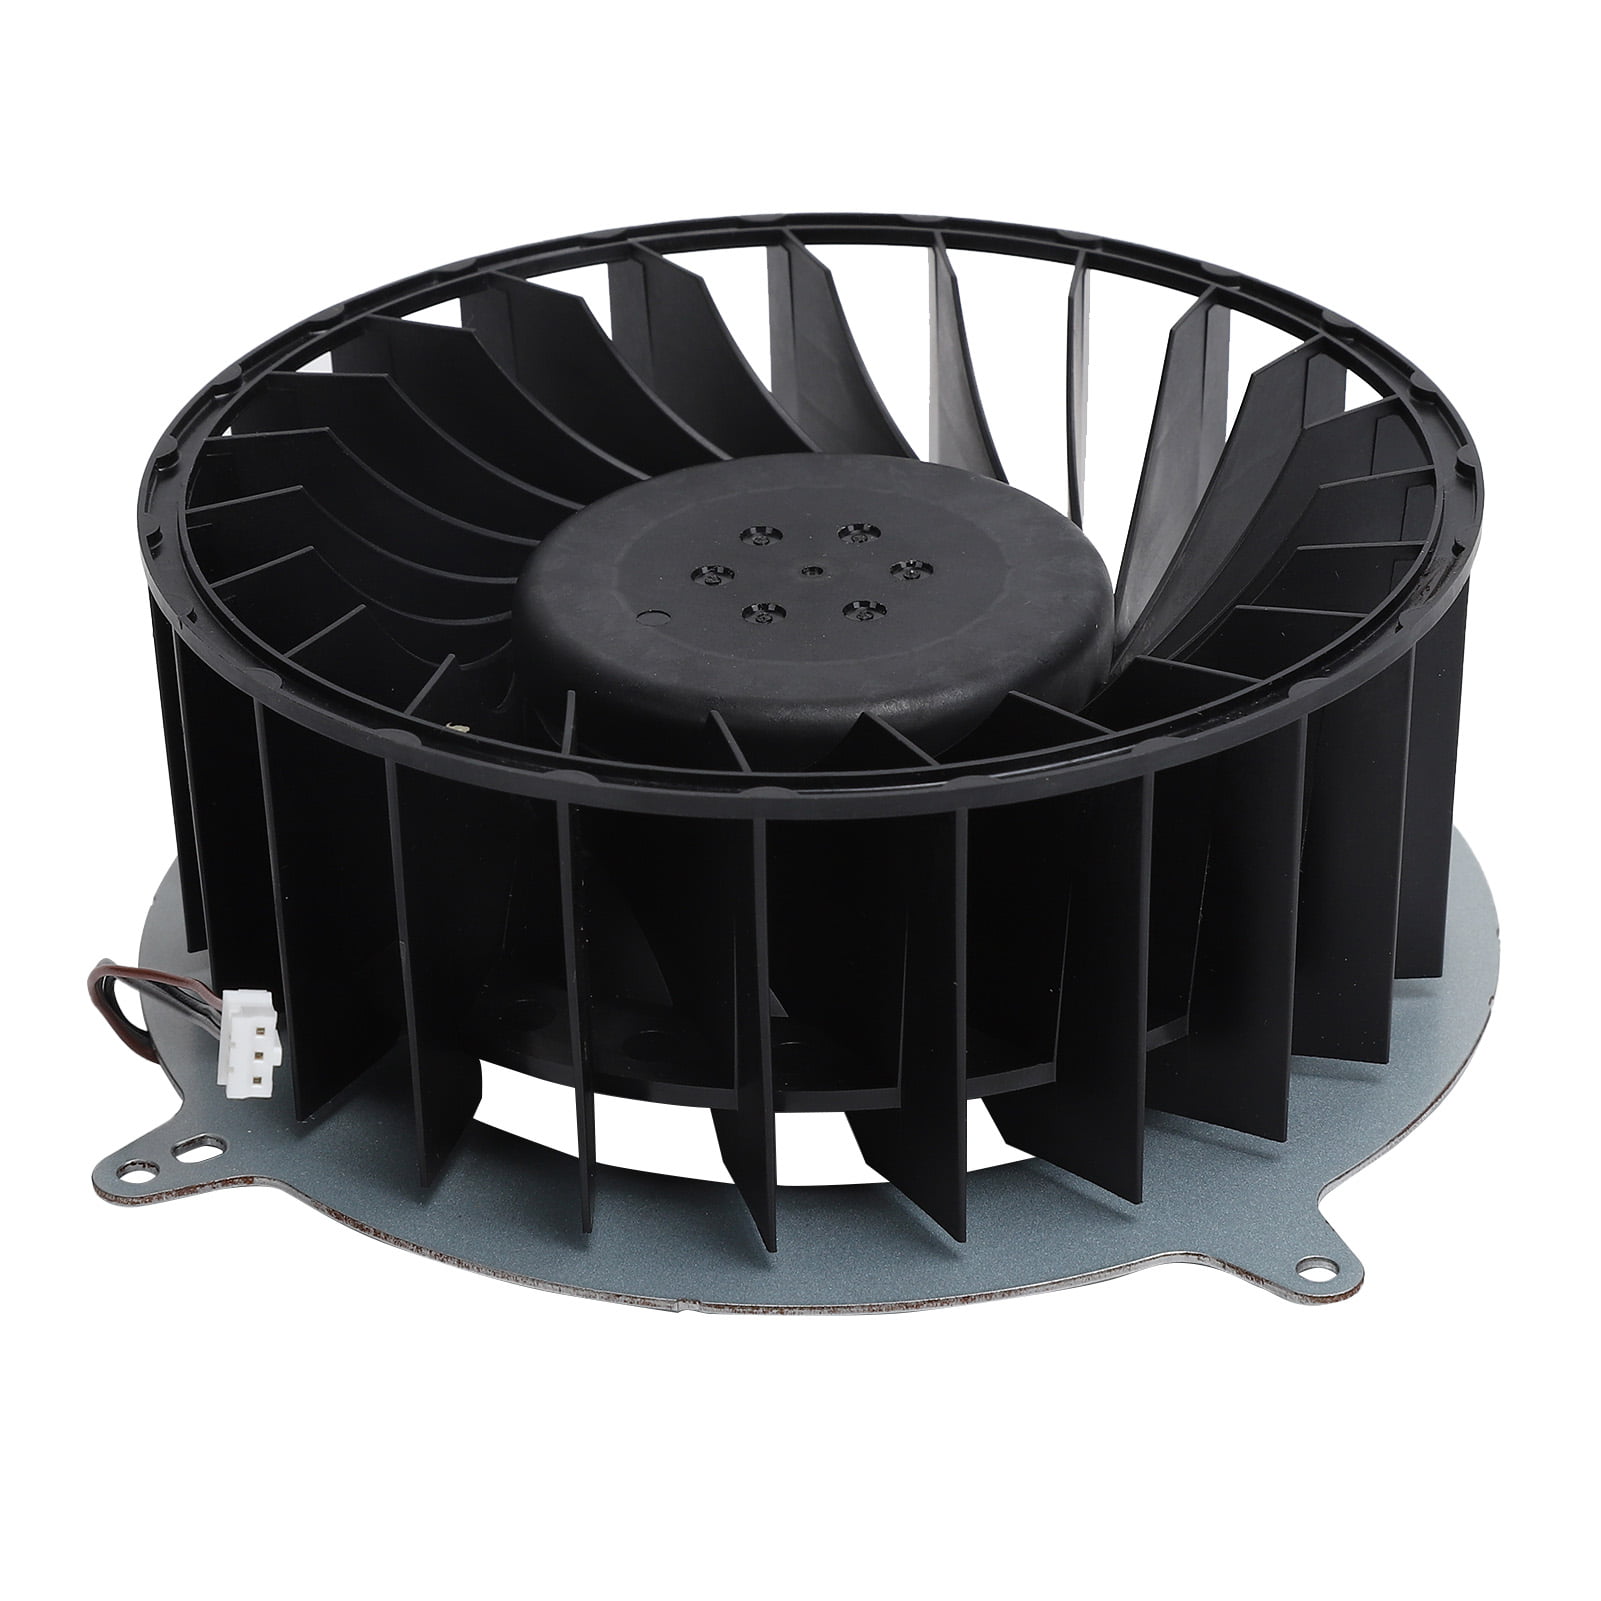 YOUTHINK CPU Cooling Fan,Silent Computer Cooling Fan,CPU Cooling 